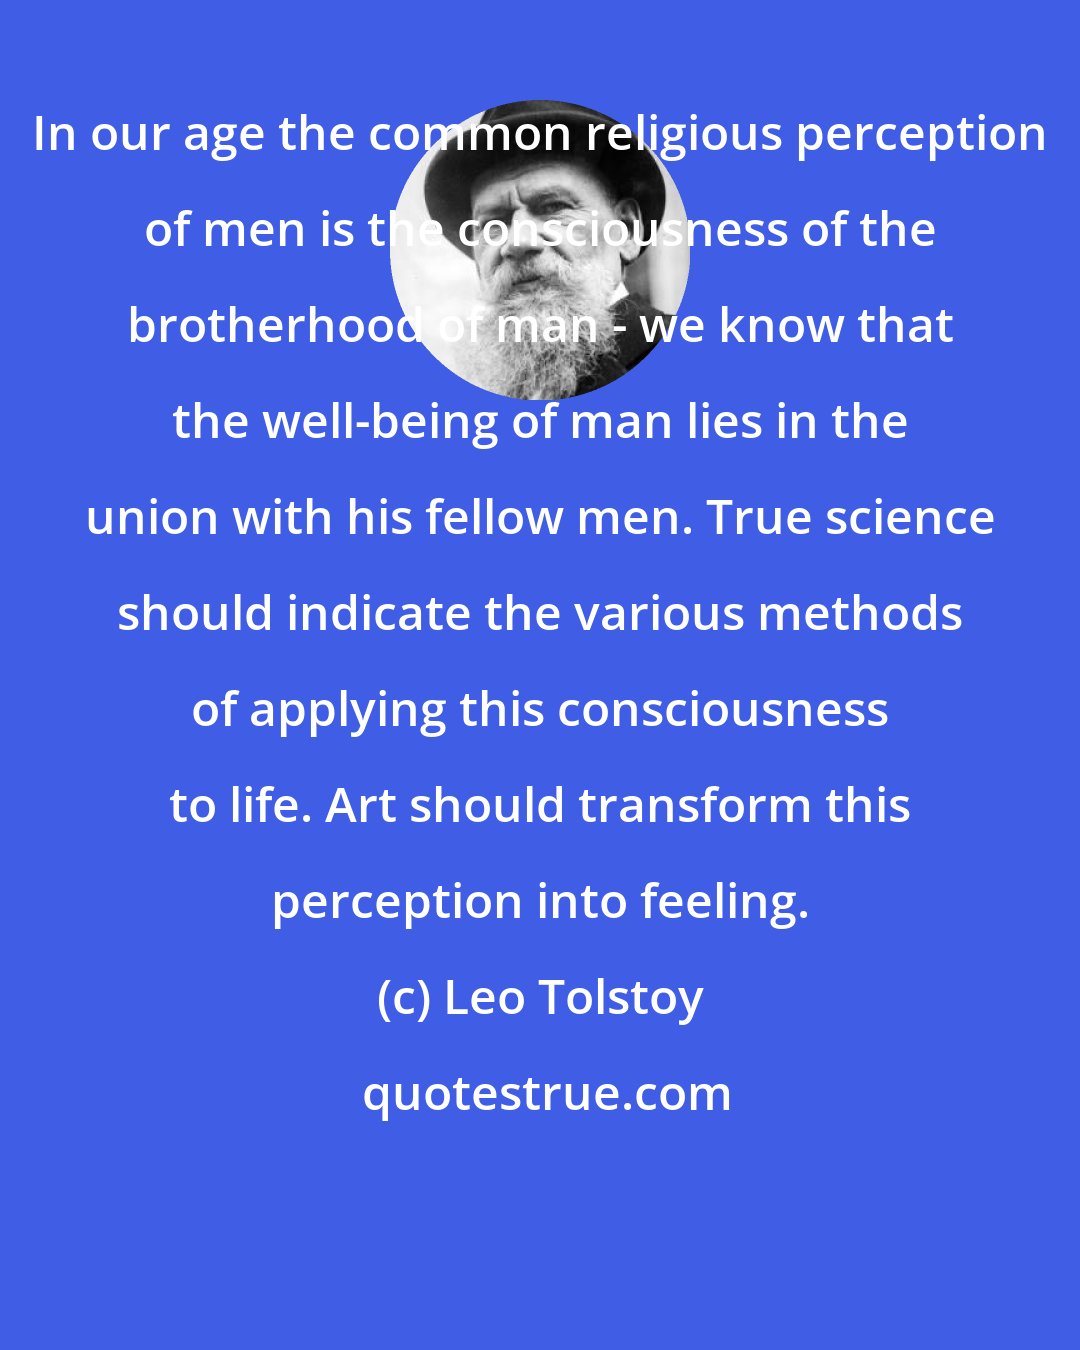 Leo Tolstoy: In our age the common religious perception of men is the consciousness of the brotherhood of man - we know that the well-being of man lies in the union with his fellow men. True science should indicate the various methods of applying this consciousness to life. Art should transform this perception into feeling.